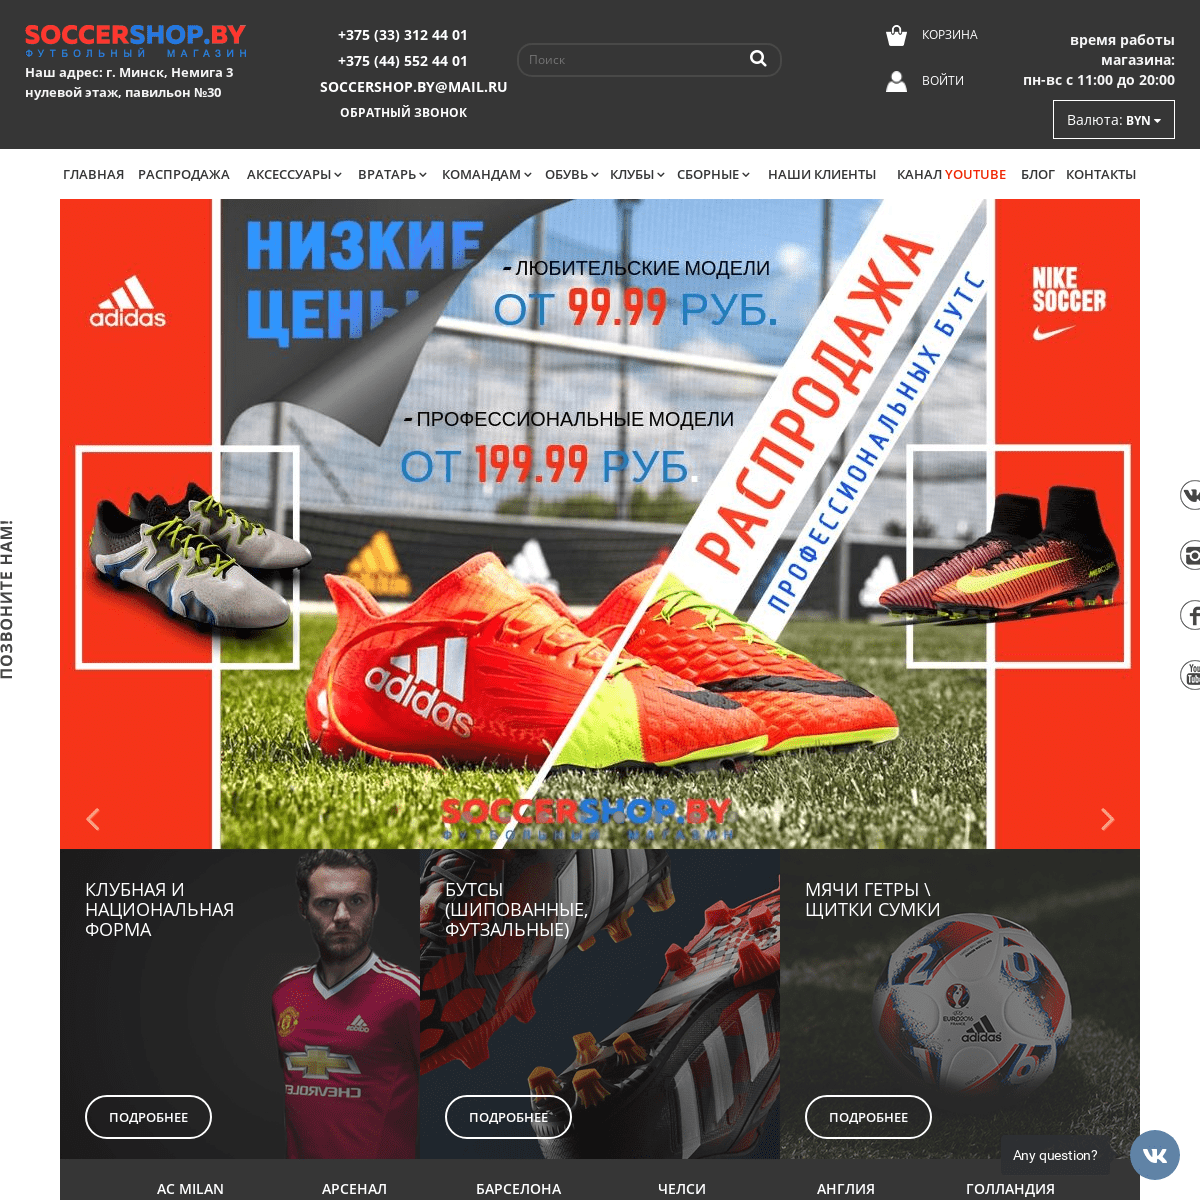 A complete backup of soccershop.by